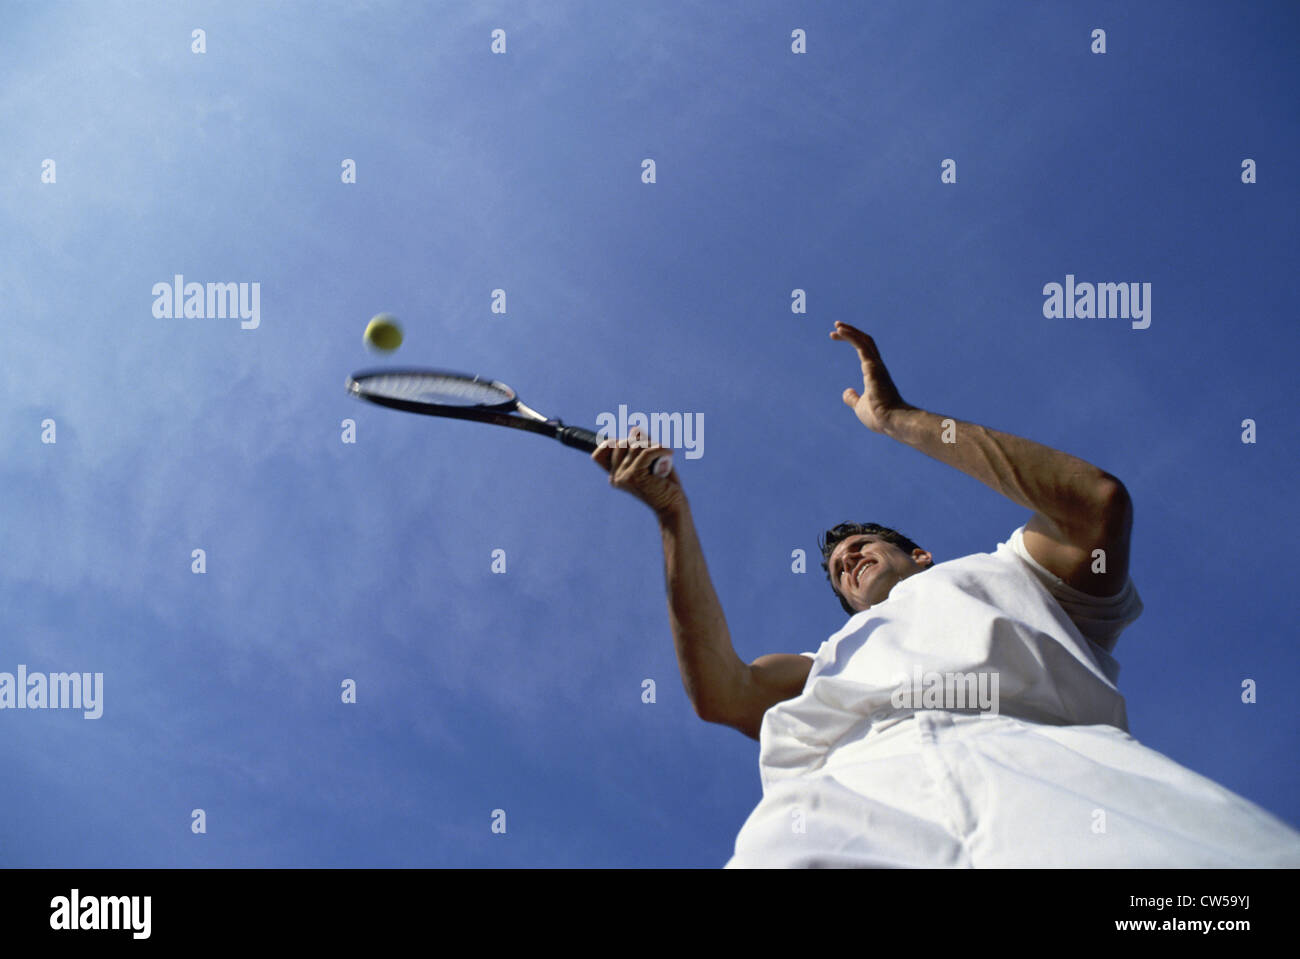 Low angle view of a mid adult man playing tennis Stock Photo